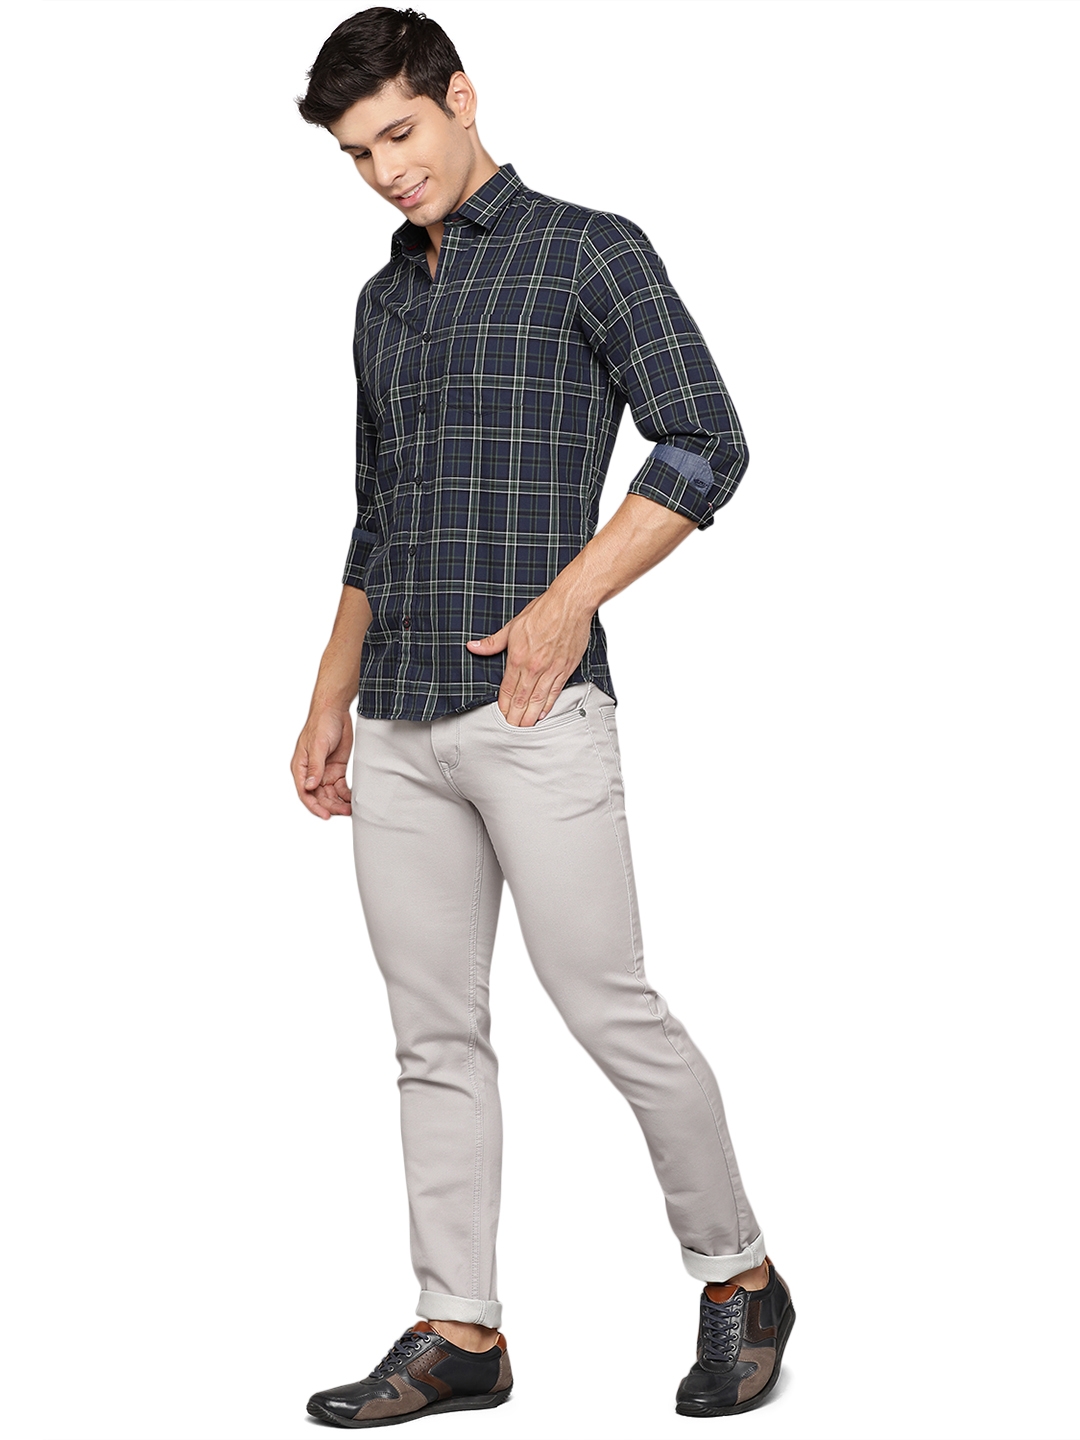 Greenfibre | Insignia Blue Checked Slim Fit Casual Shirt | Greenfibre 3